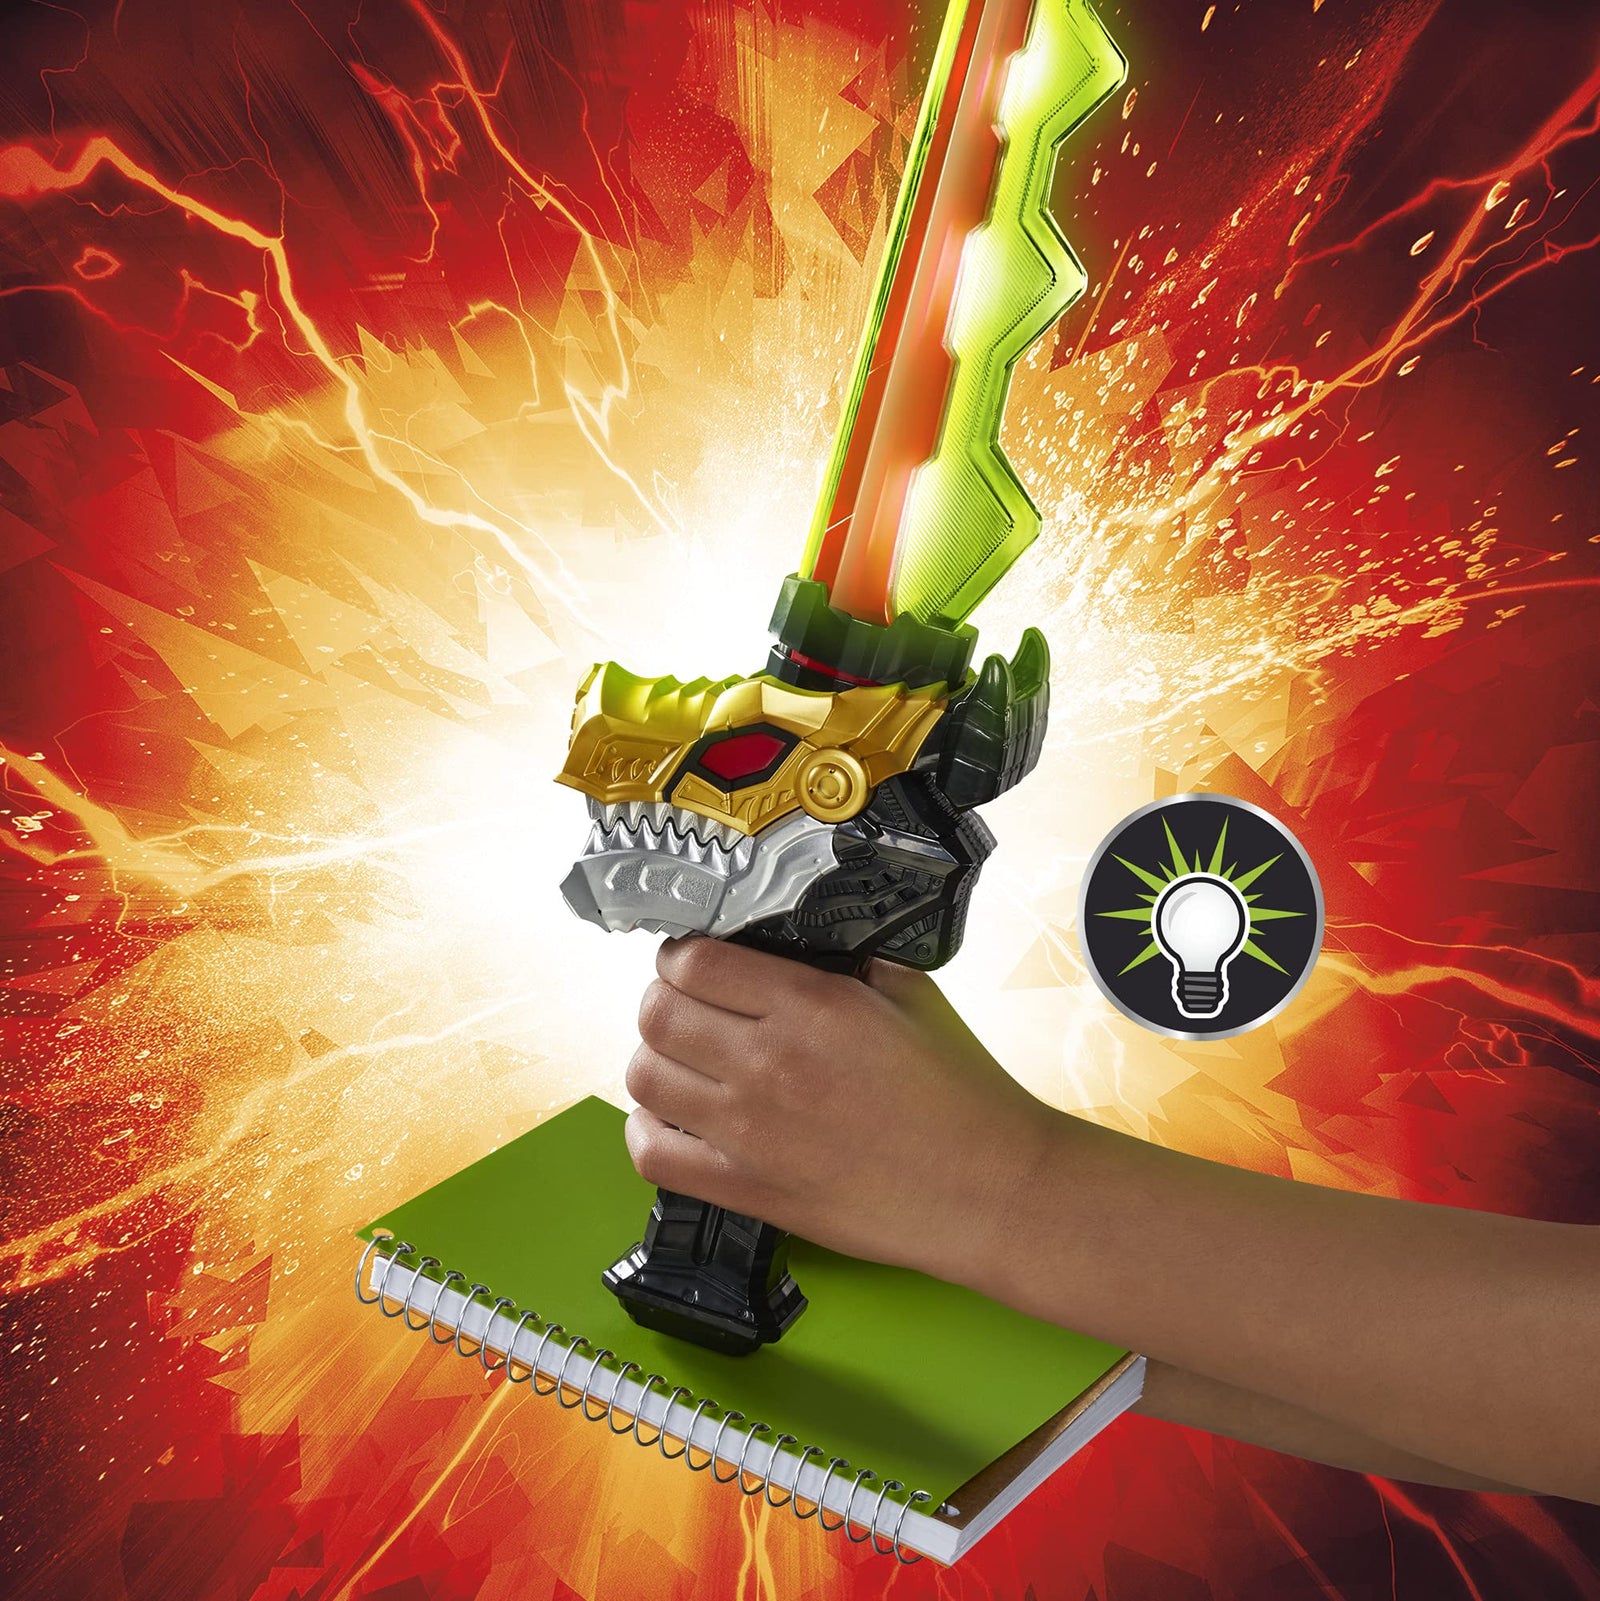 Power Rangers Dino Fury Chromafury Saber Electronic Color-Scanning Toy with Lights and Sounds, Inspired by The TV Show Ages 5 and Up